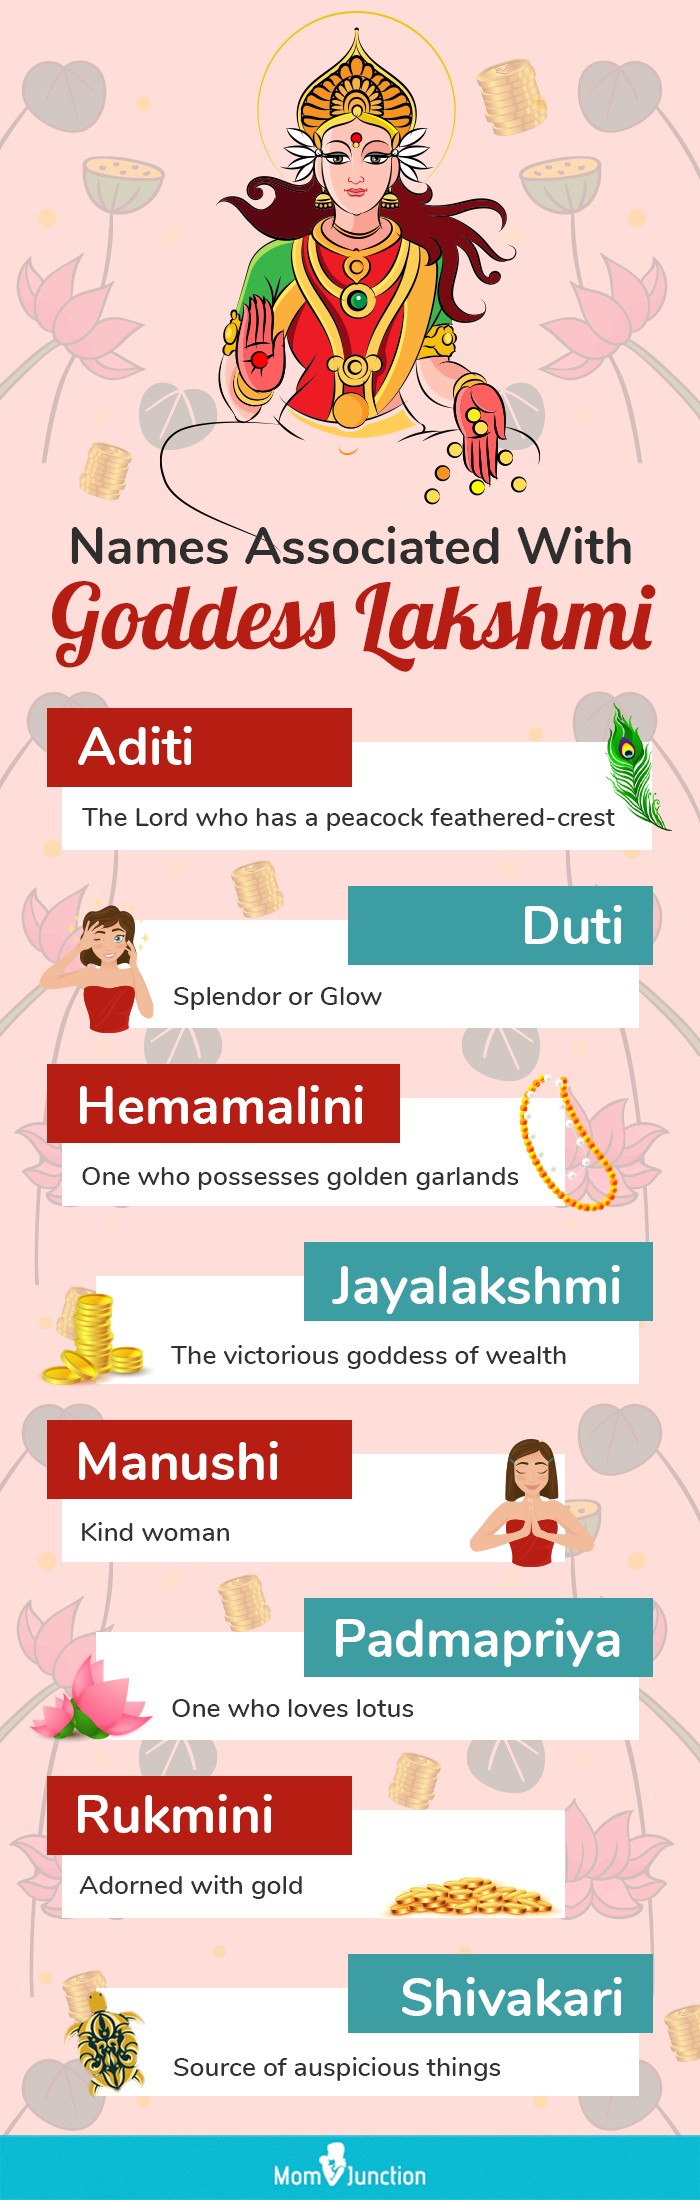 names associated with goddess lakshmi [infographic]